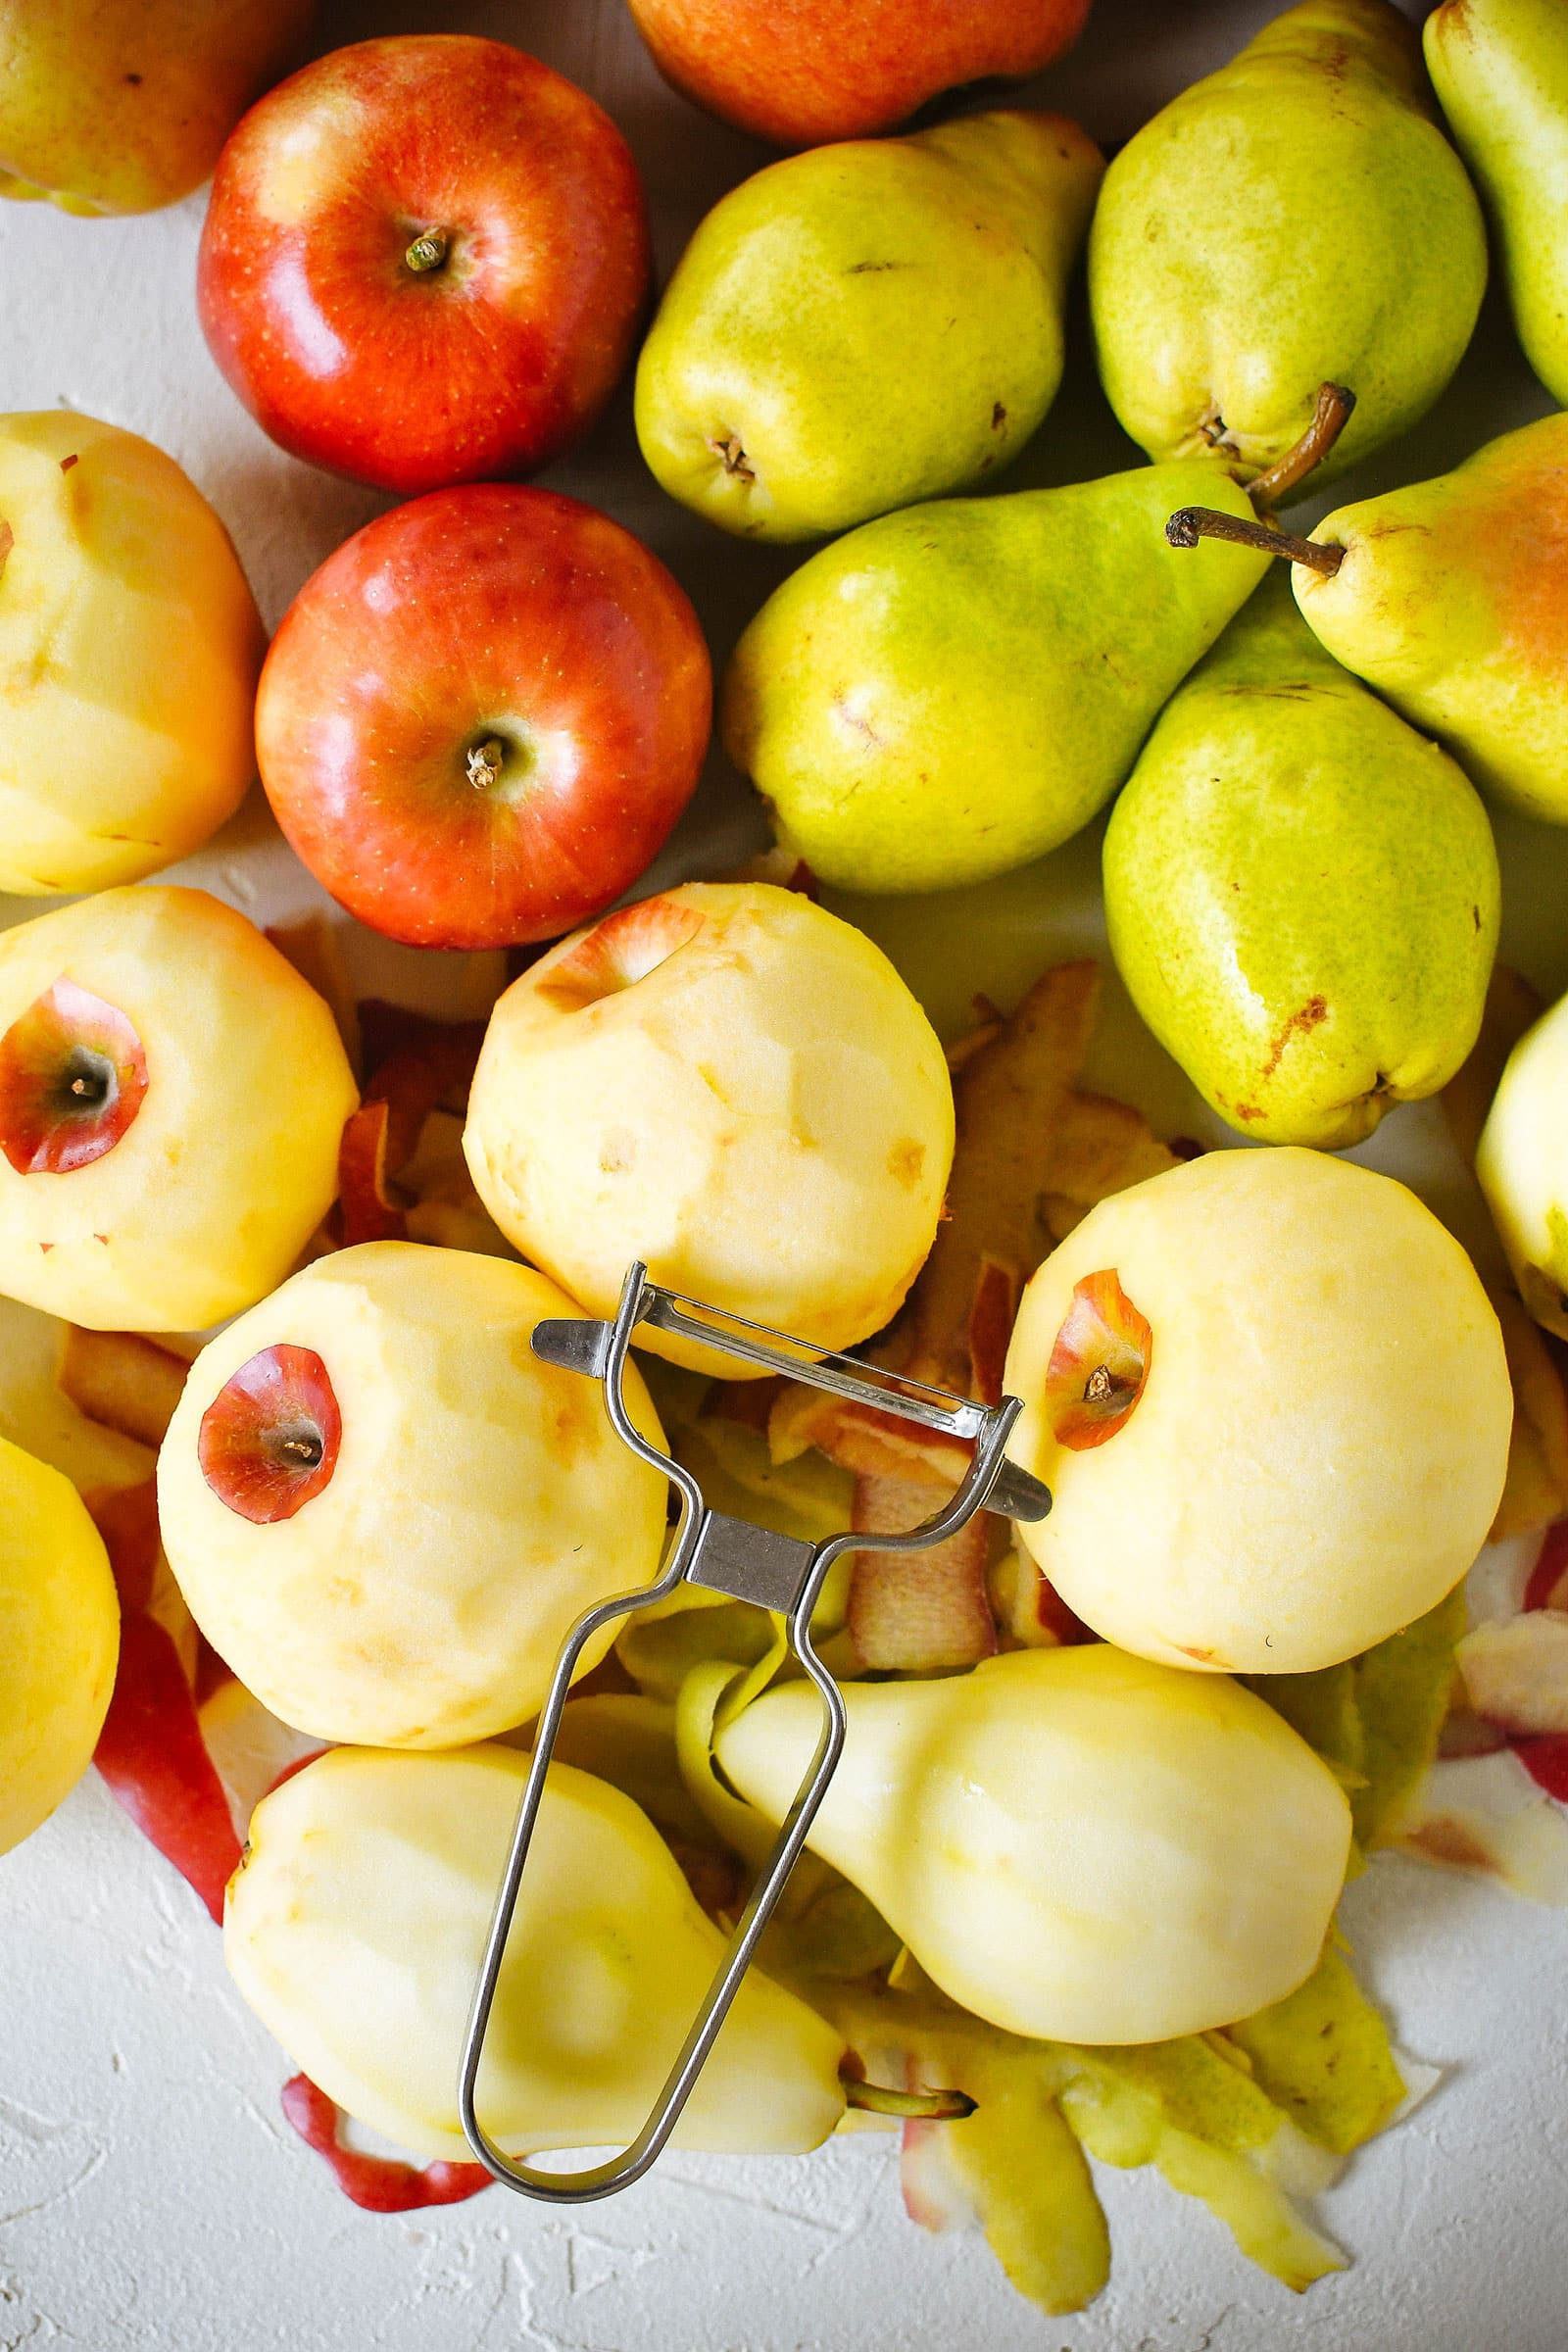 A pile of red apples and green pears, with some fruits peeled next to a metal peeler